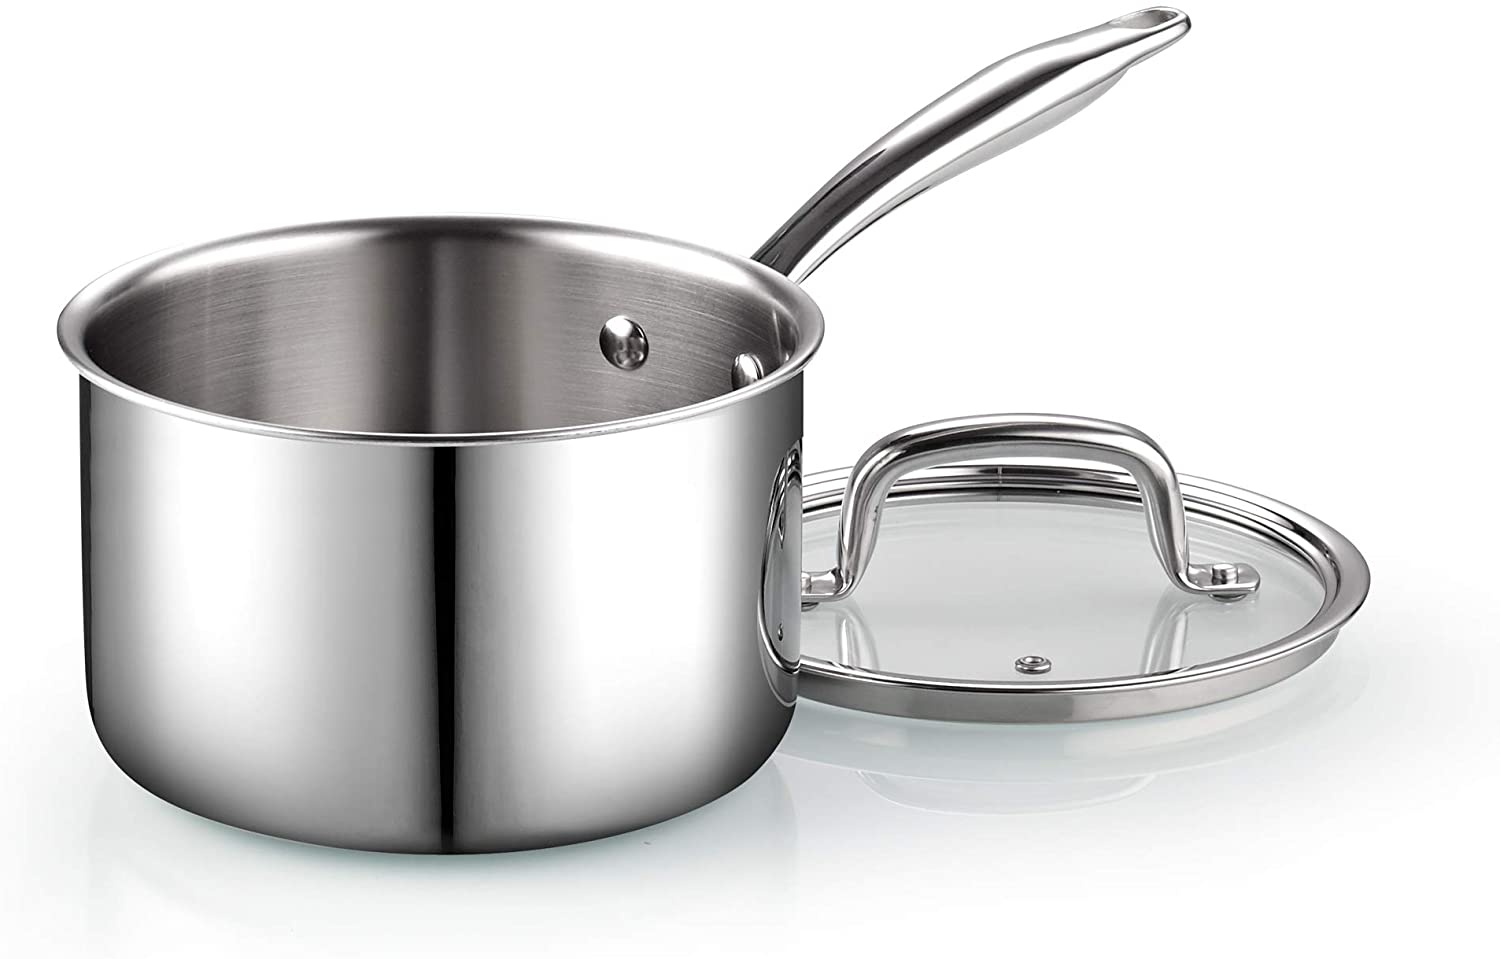 Cook N Home 3-Quart Stainless Steel Saucepan with Lid